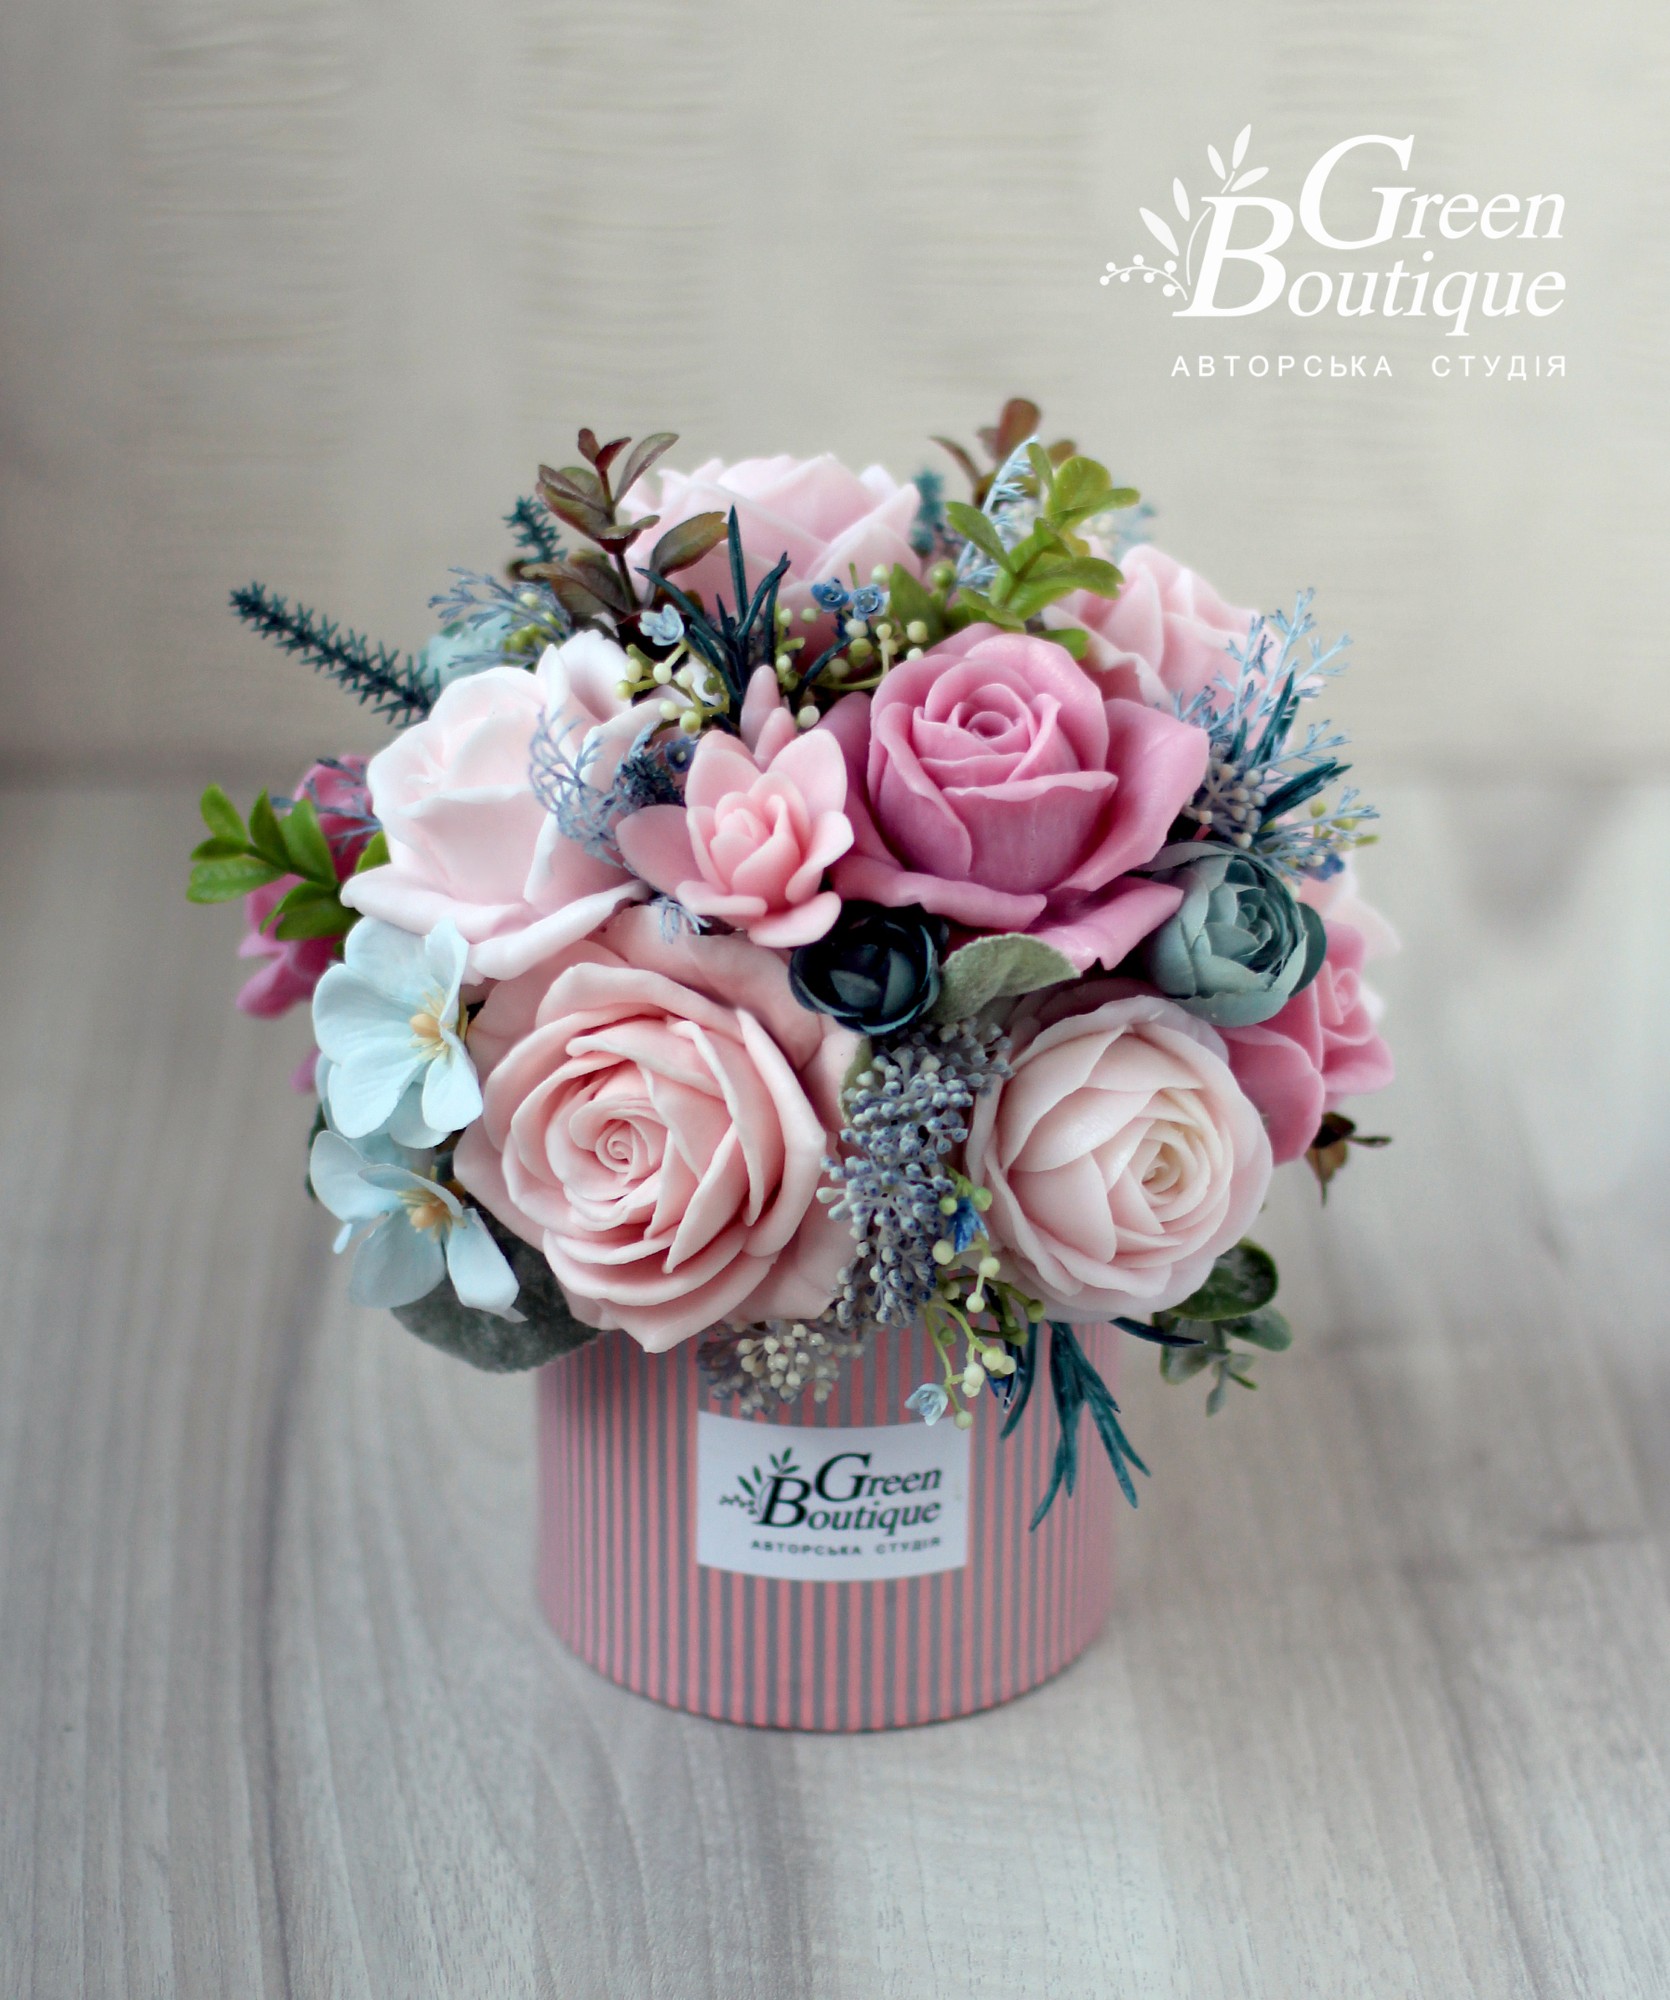 Luxurious interior bouquet of soap roses in a designer box